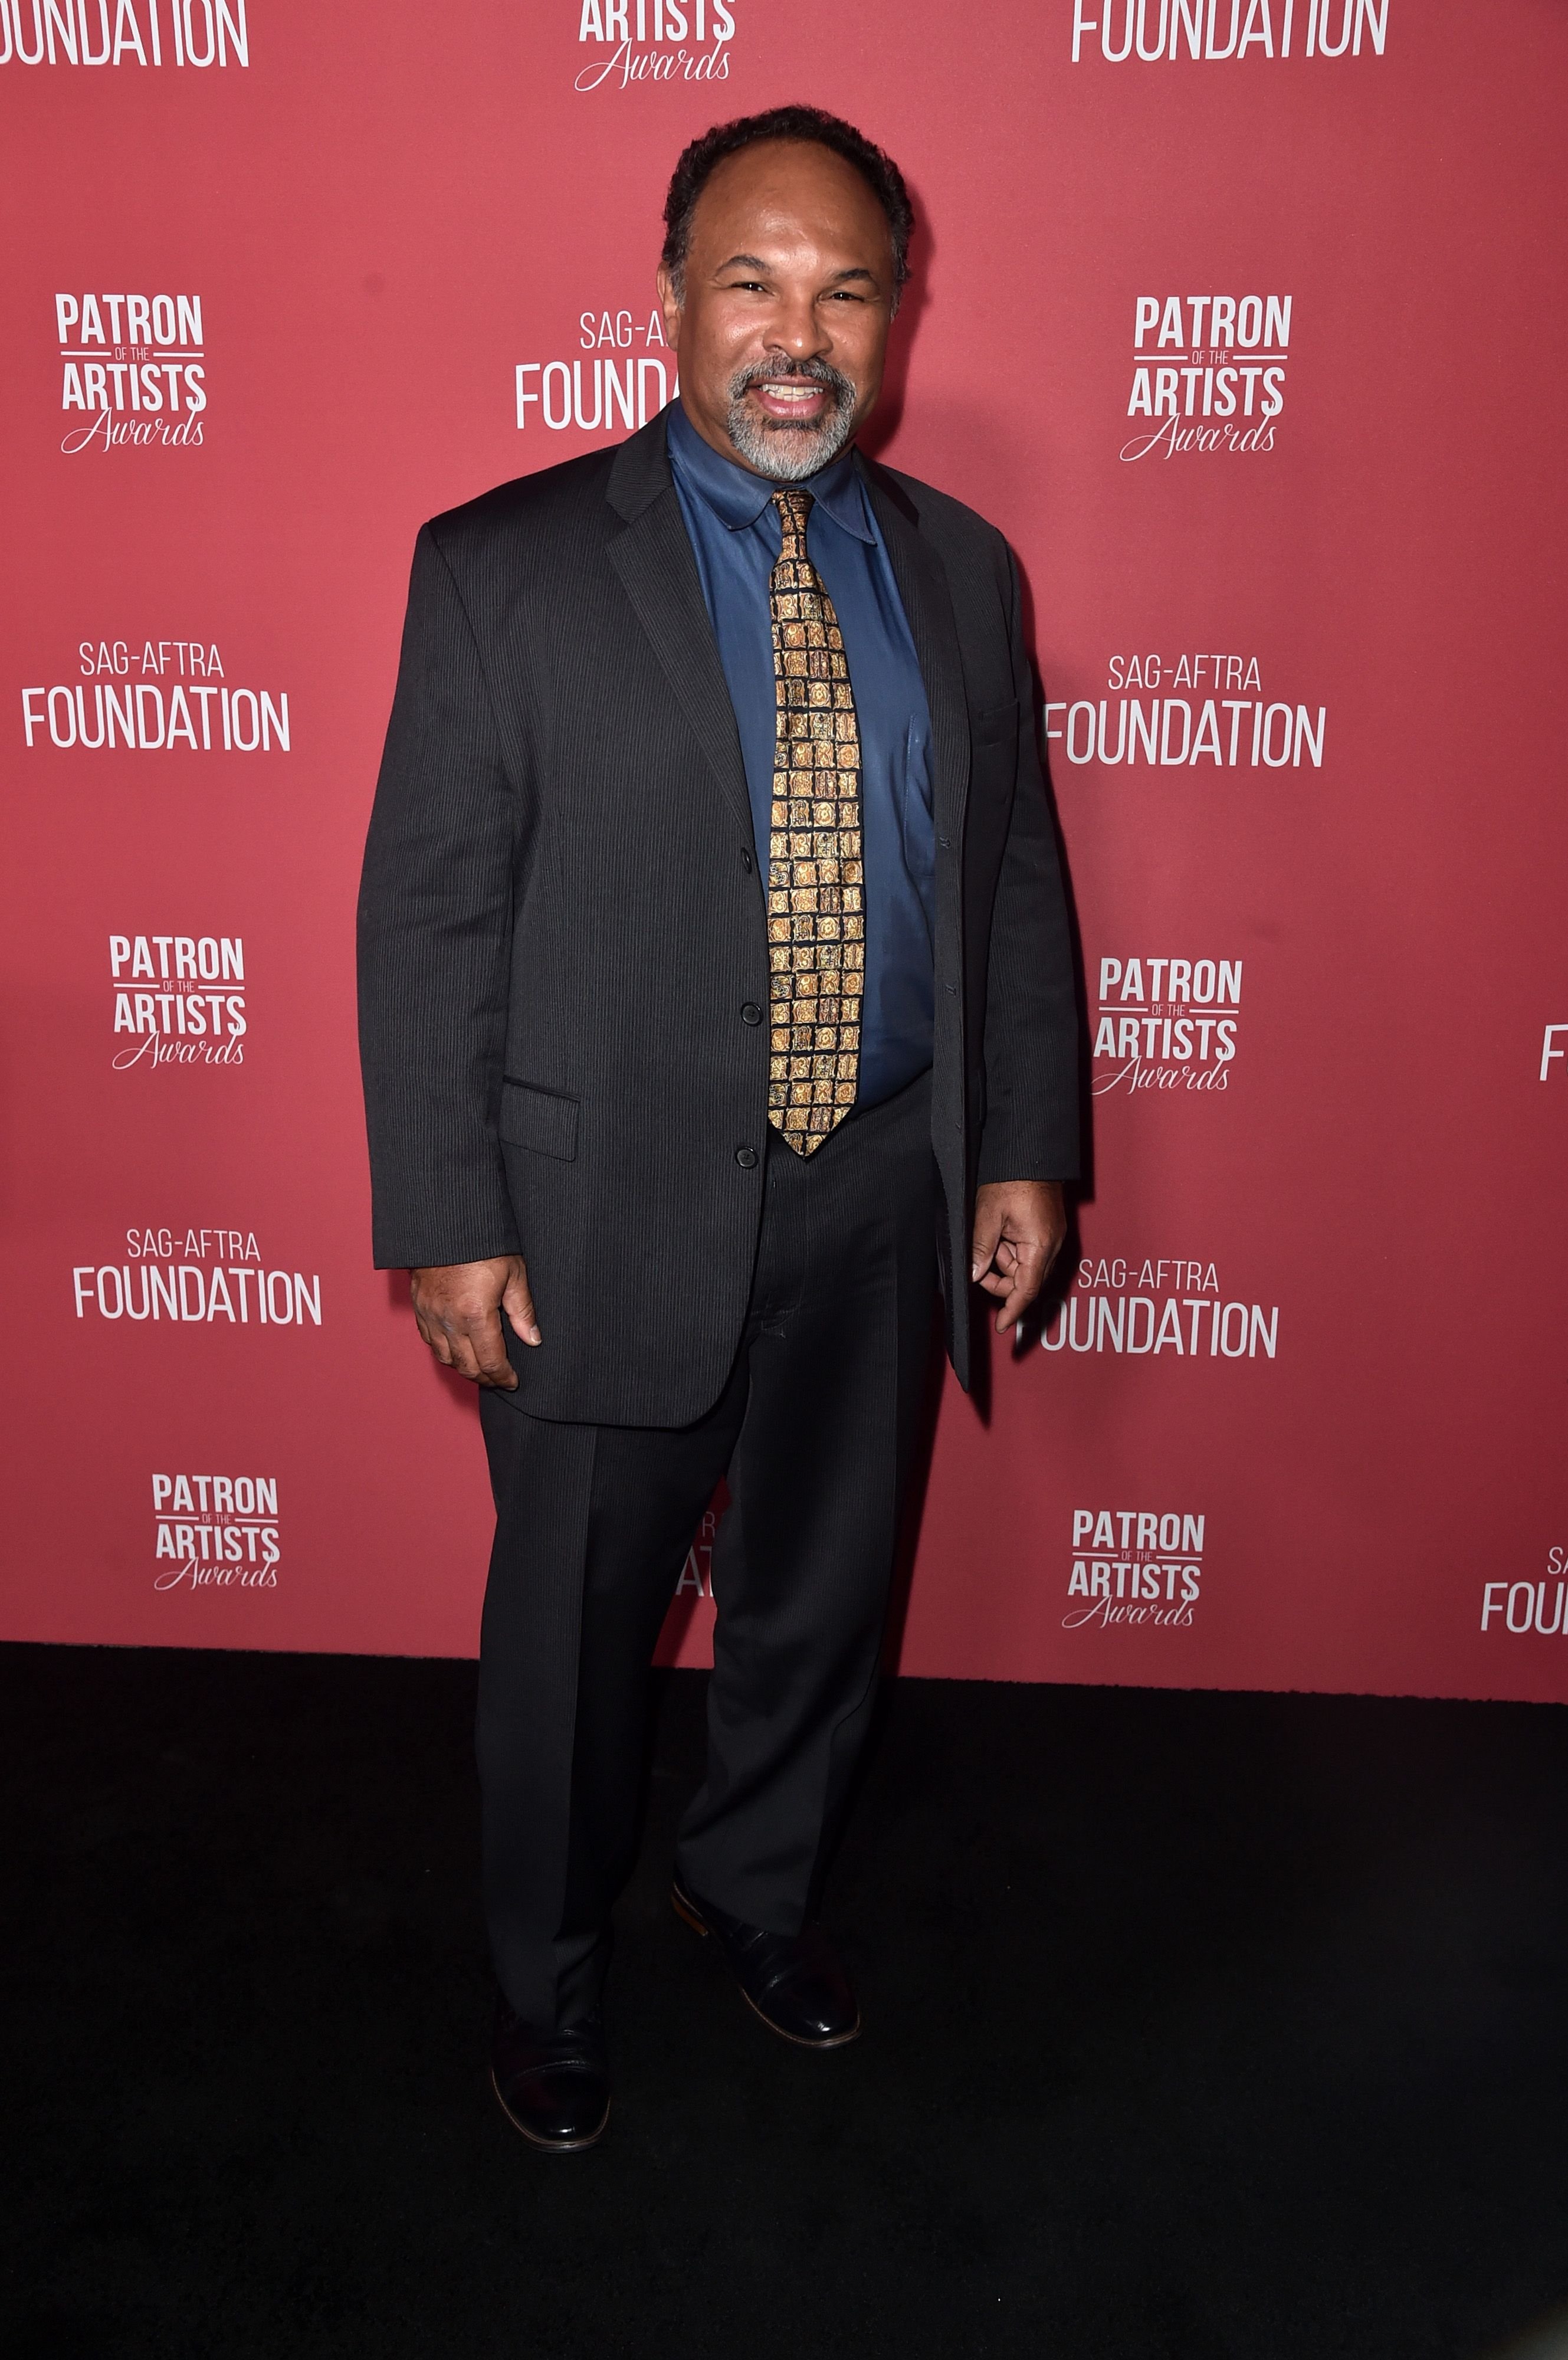 Geoffrey Owens during the SAG-AFTRA Foundation's 3rd Annual Patron of the Artists Awards at Wallis Annenberg Center for the Performing Arts on November 8, 2018 in Beverly Hills, California. | Source: Getty Images